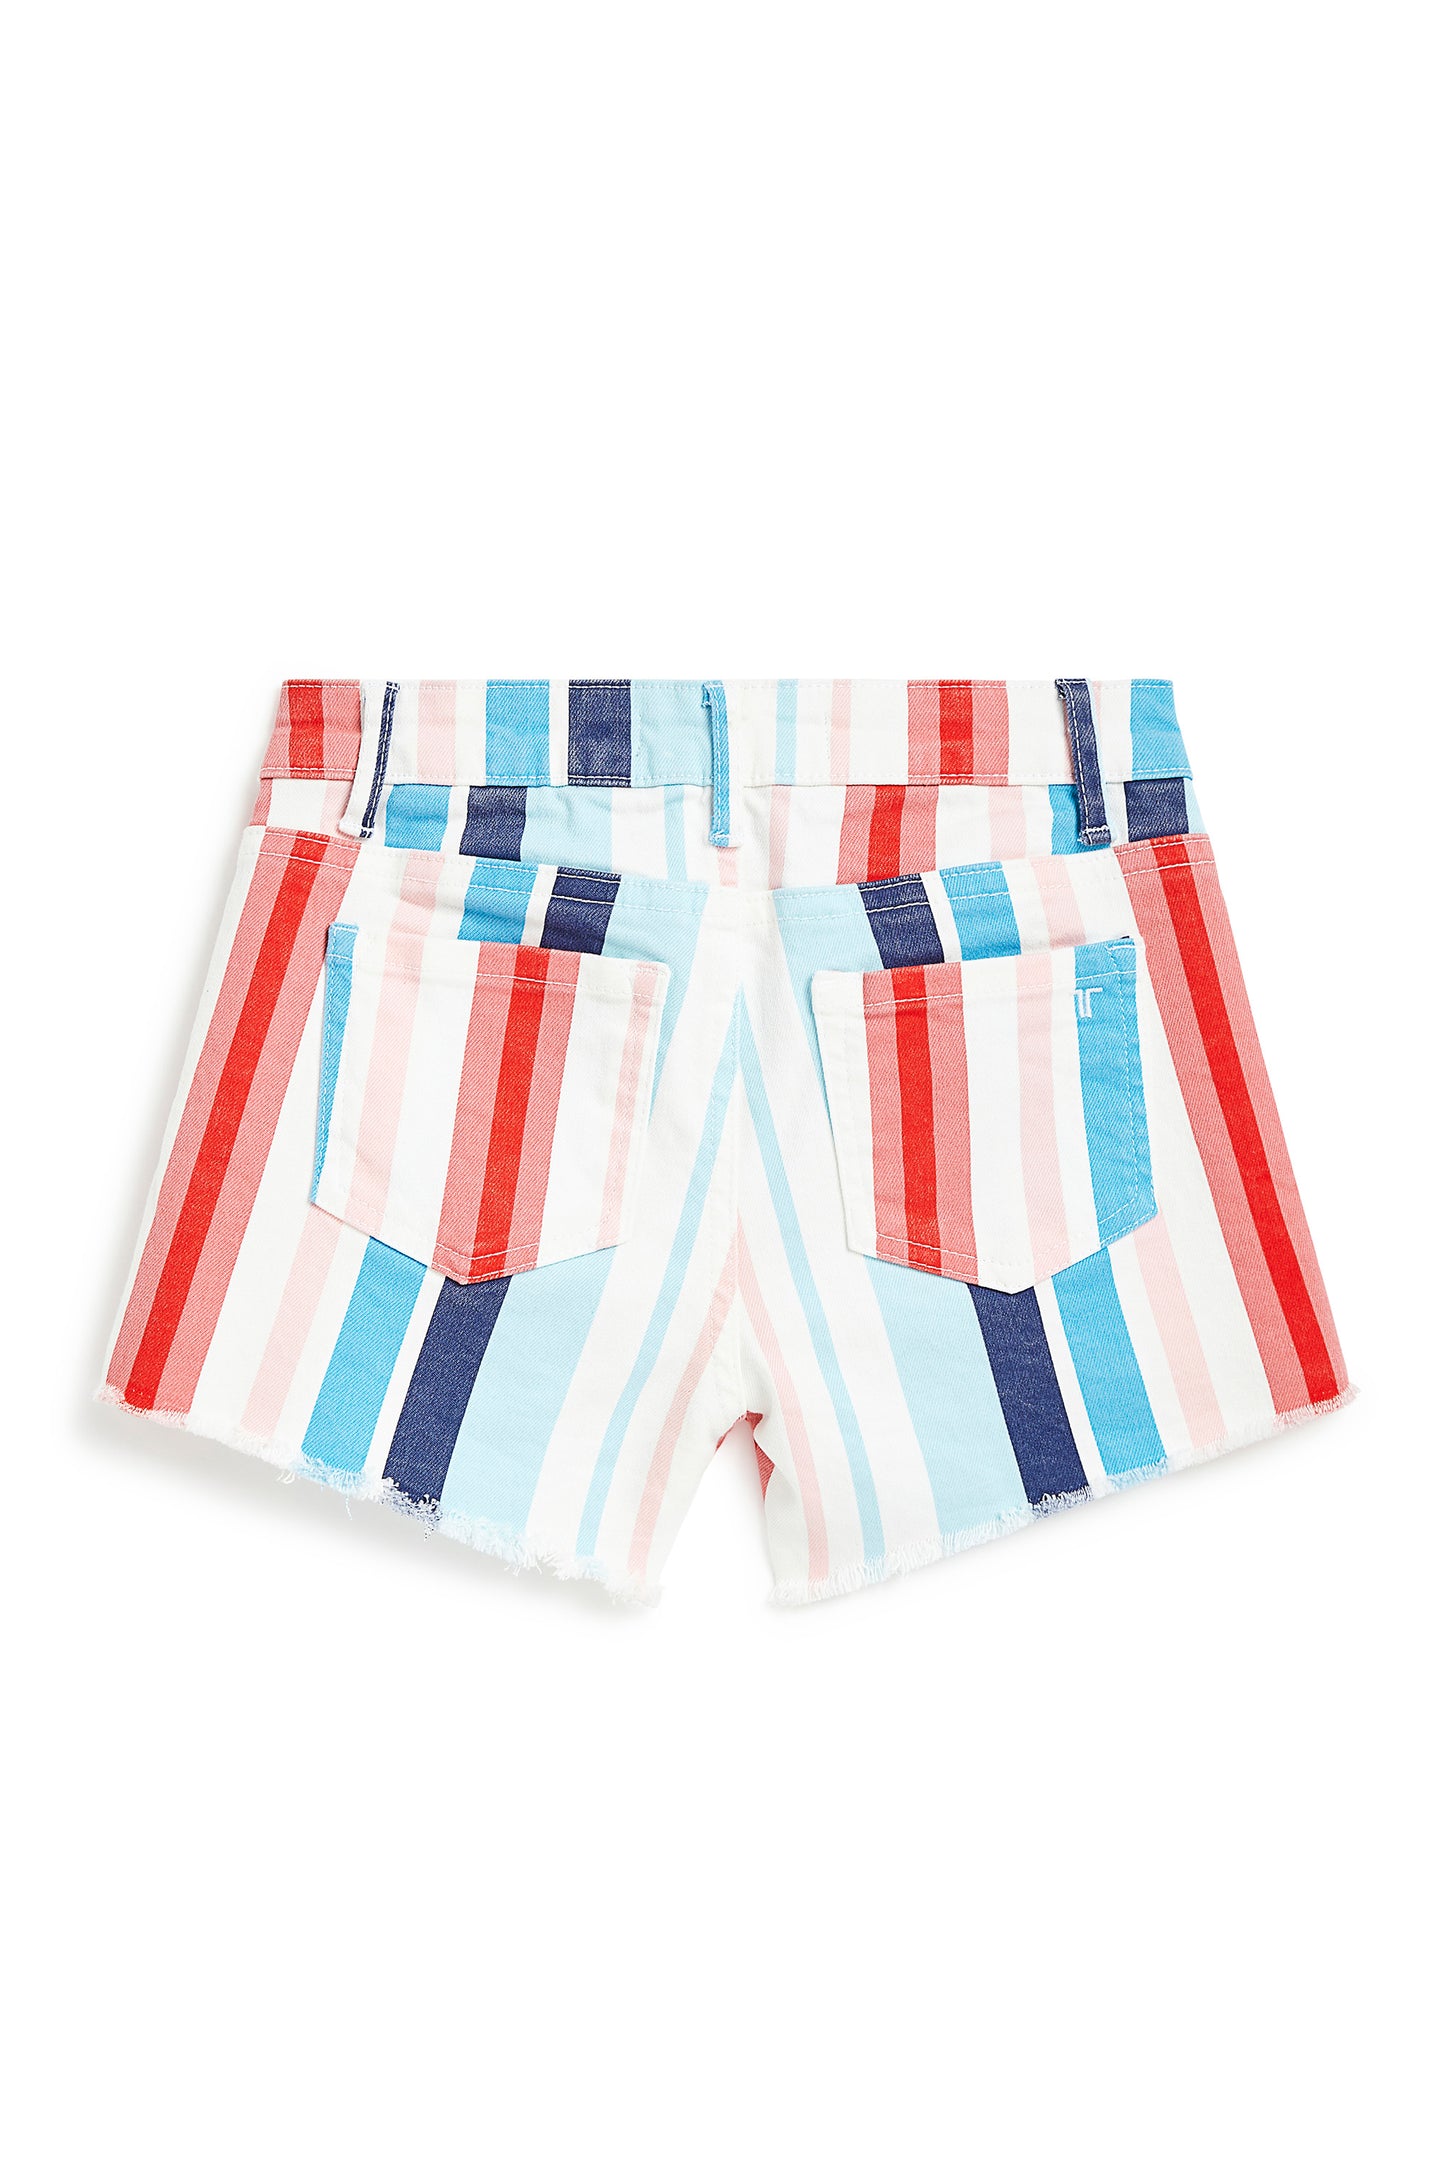 Brittany - Colorful Stripe Short